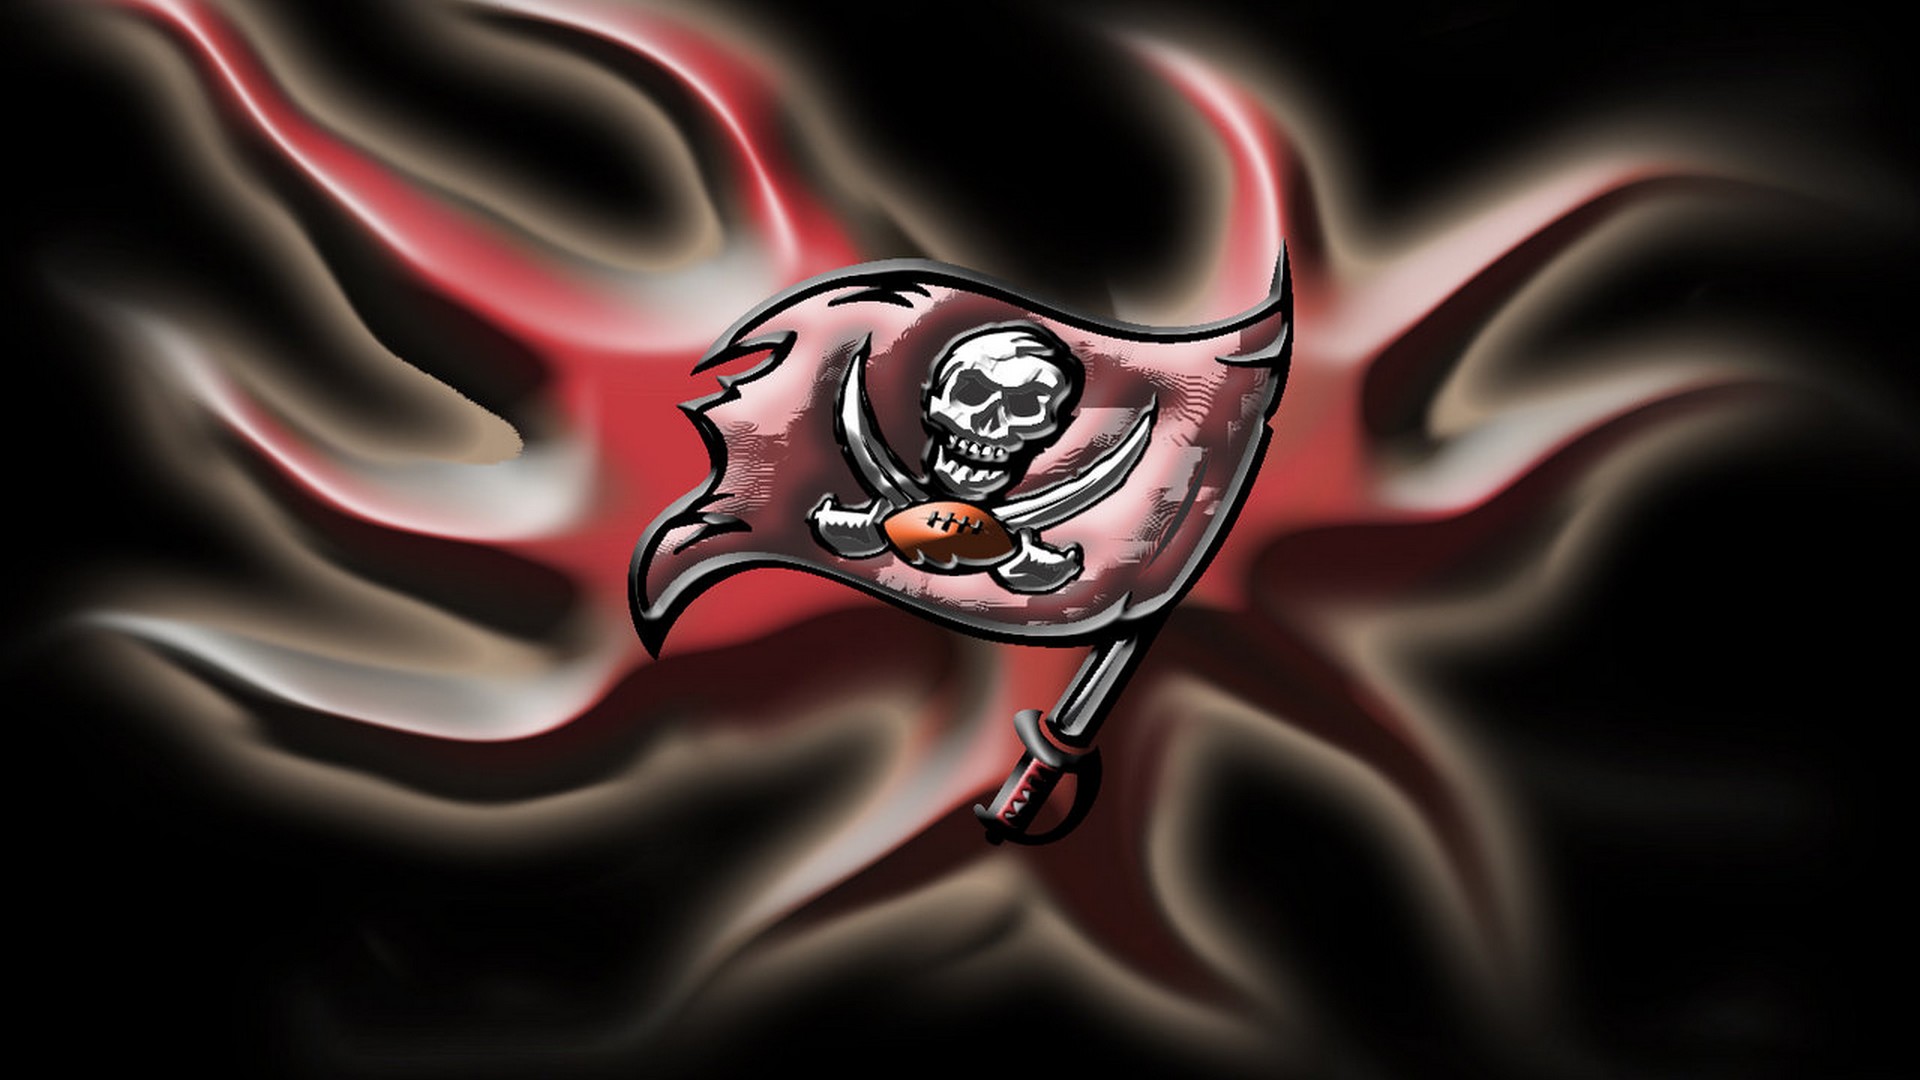 HD Tampa Bay Buccaneers Backgrounds With high-resolution 1920X1080 pixel. Download and set as wallpaper for Desktop Computer, Apple iPhone X, XS Max, XR, 8, 7, 6, SE, iPad, Android